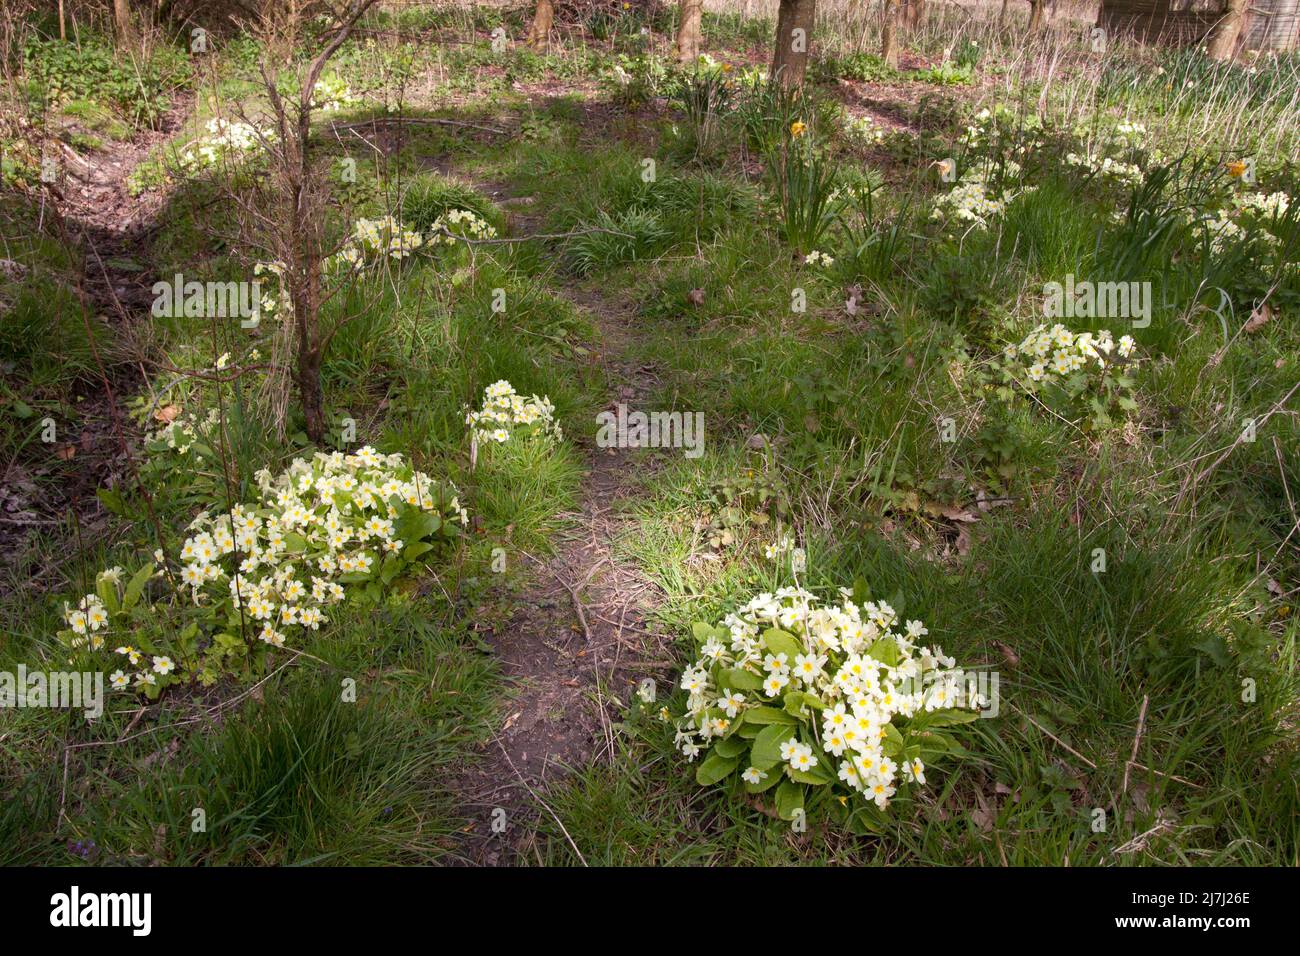 Binstead, West Sussex, England, primroses growing in woods designated for Arundel bypass 2021 Stock Photo